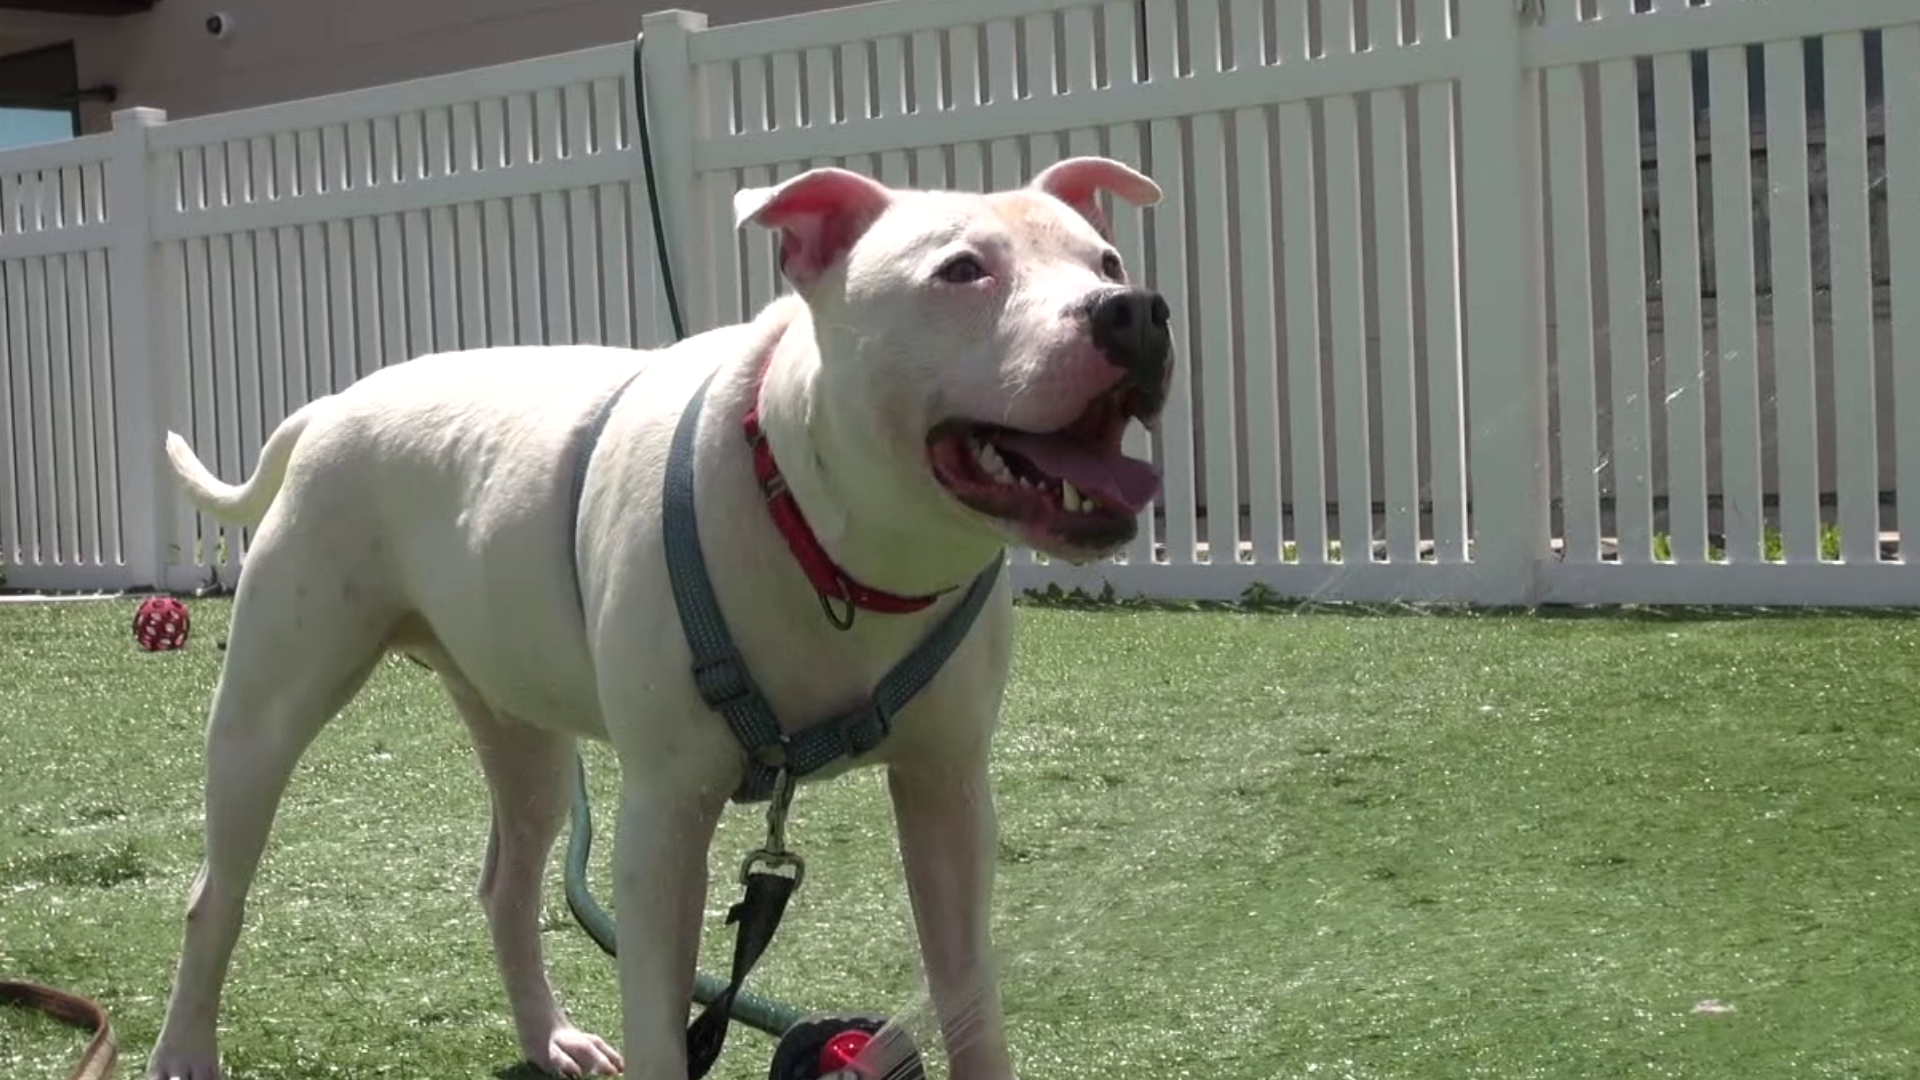 In this "16 To The Rescue" we meet a dog, who not only has a zest for life, he also has an appreciation for sprinklers in the summertime.